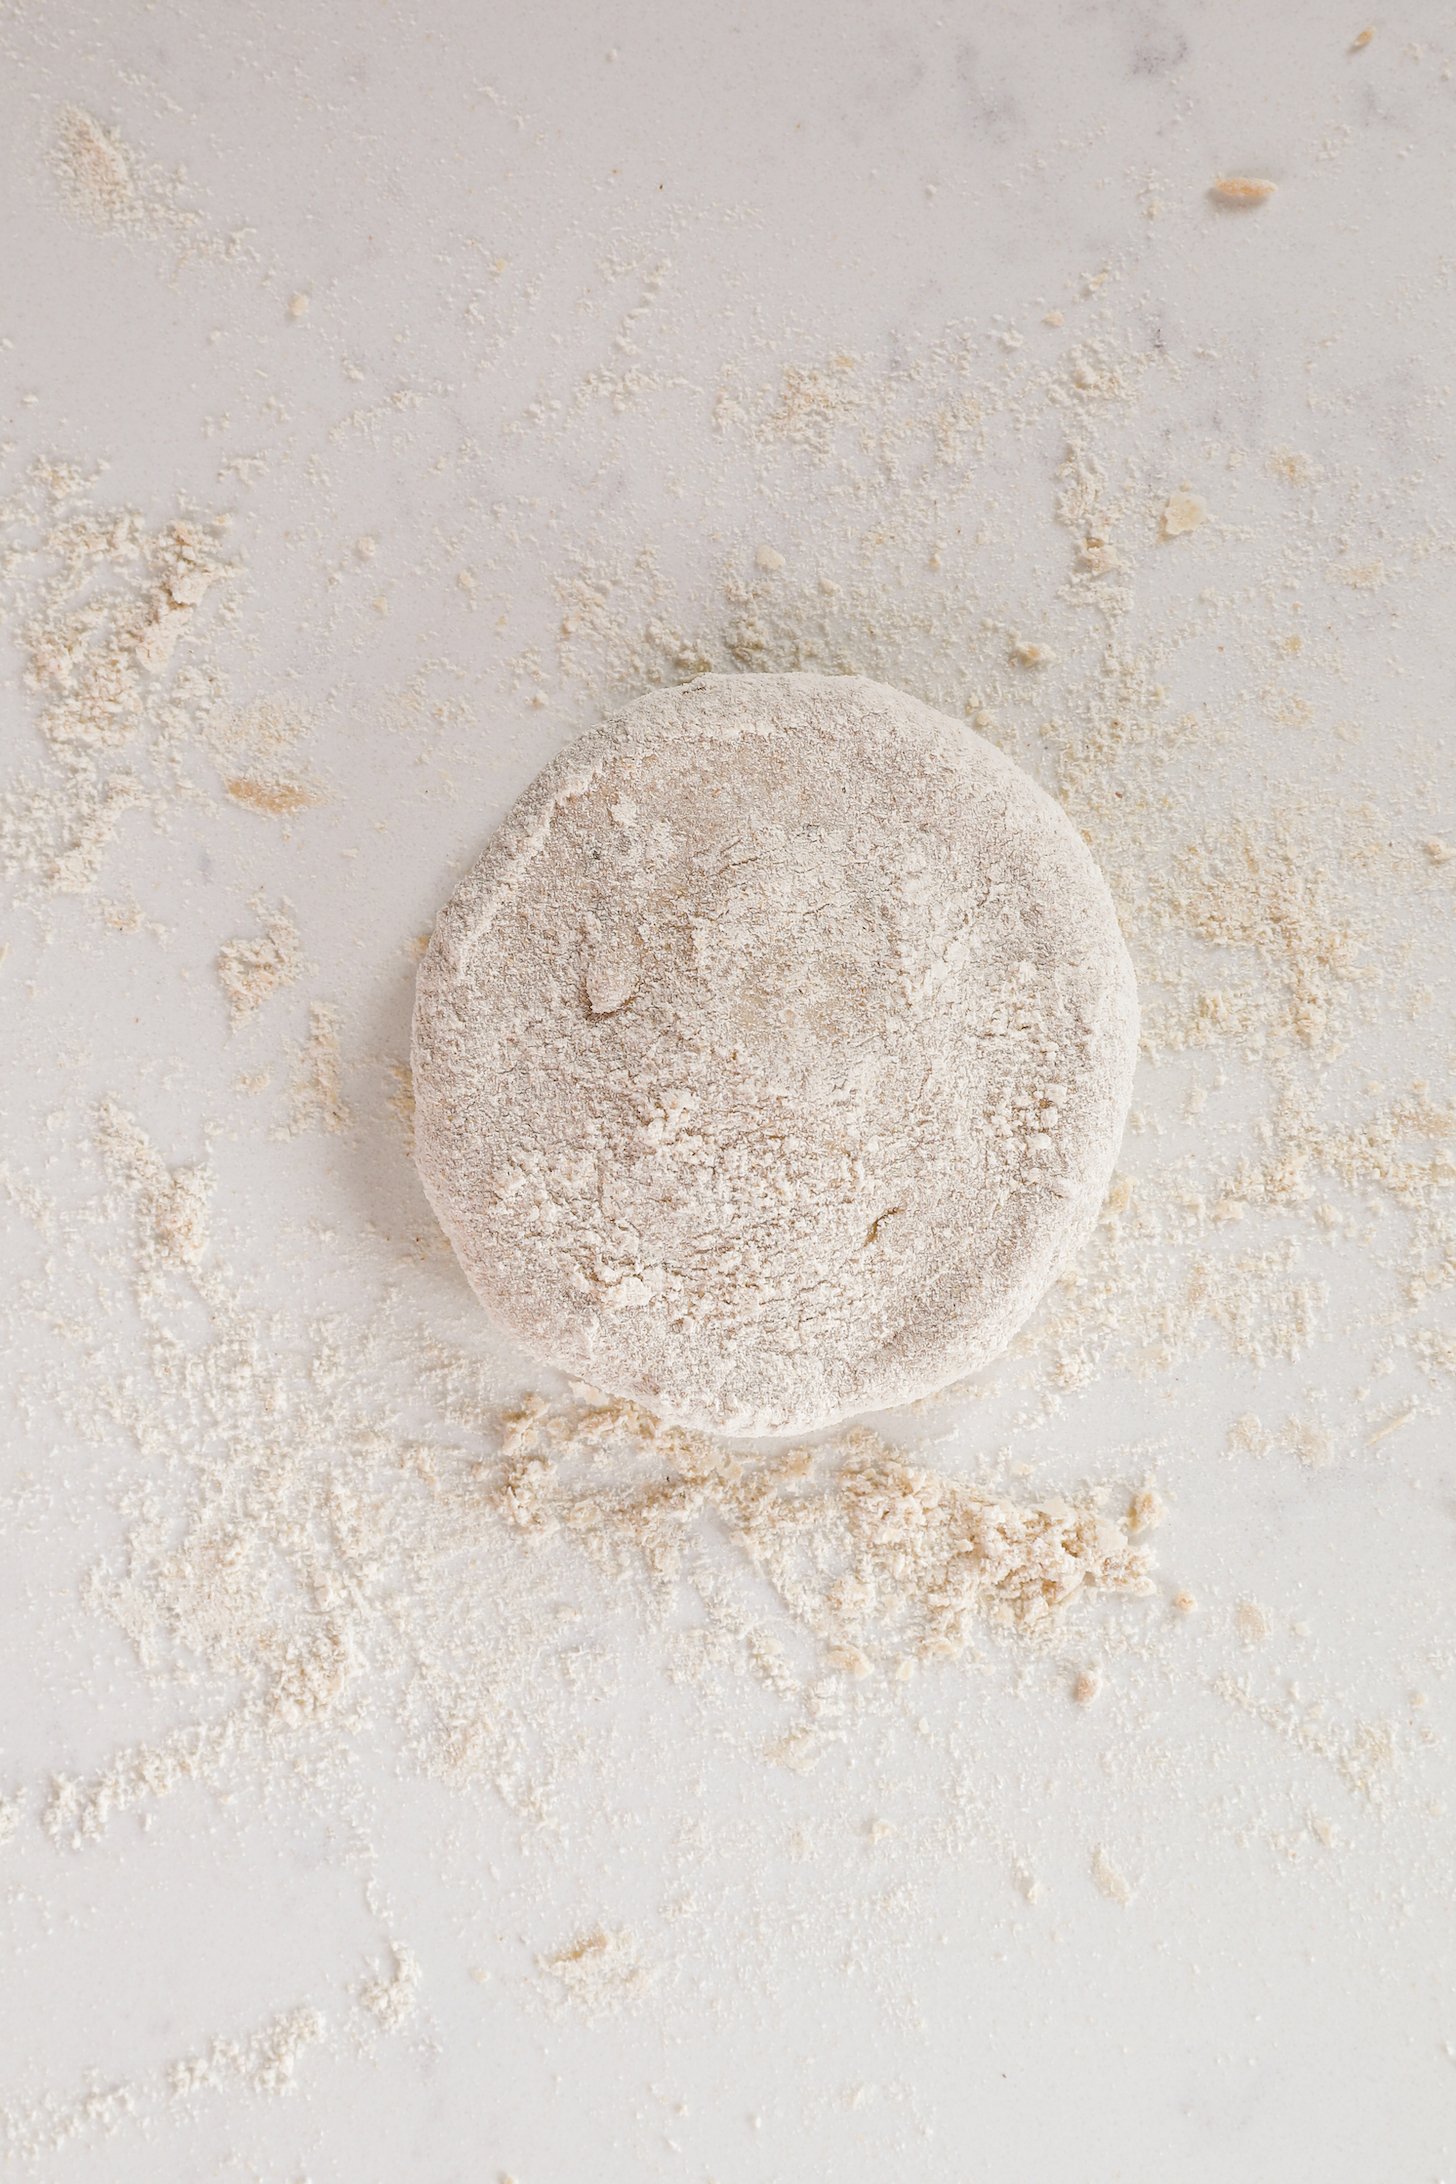 A thick flattened dough dusted with lots of flour on a flour-dusted worktop.